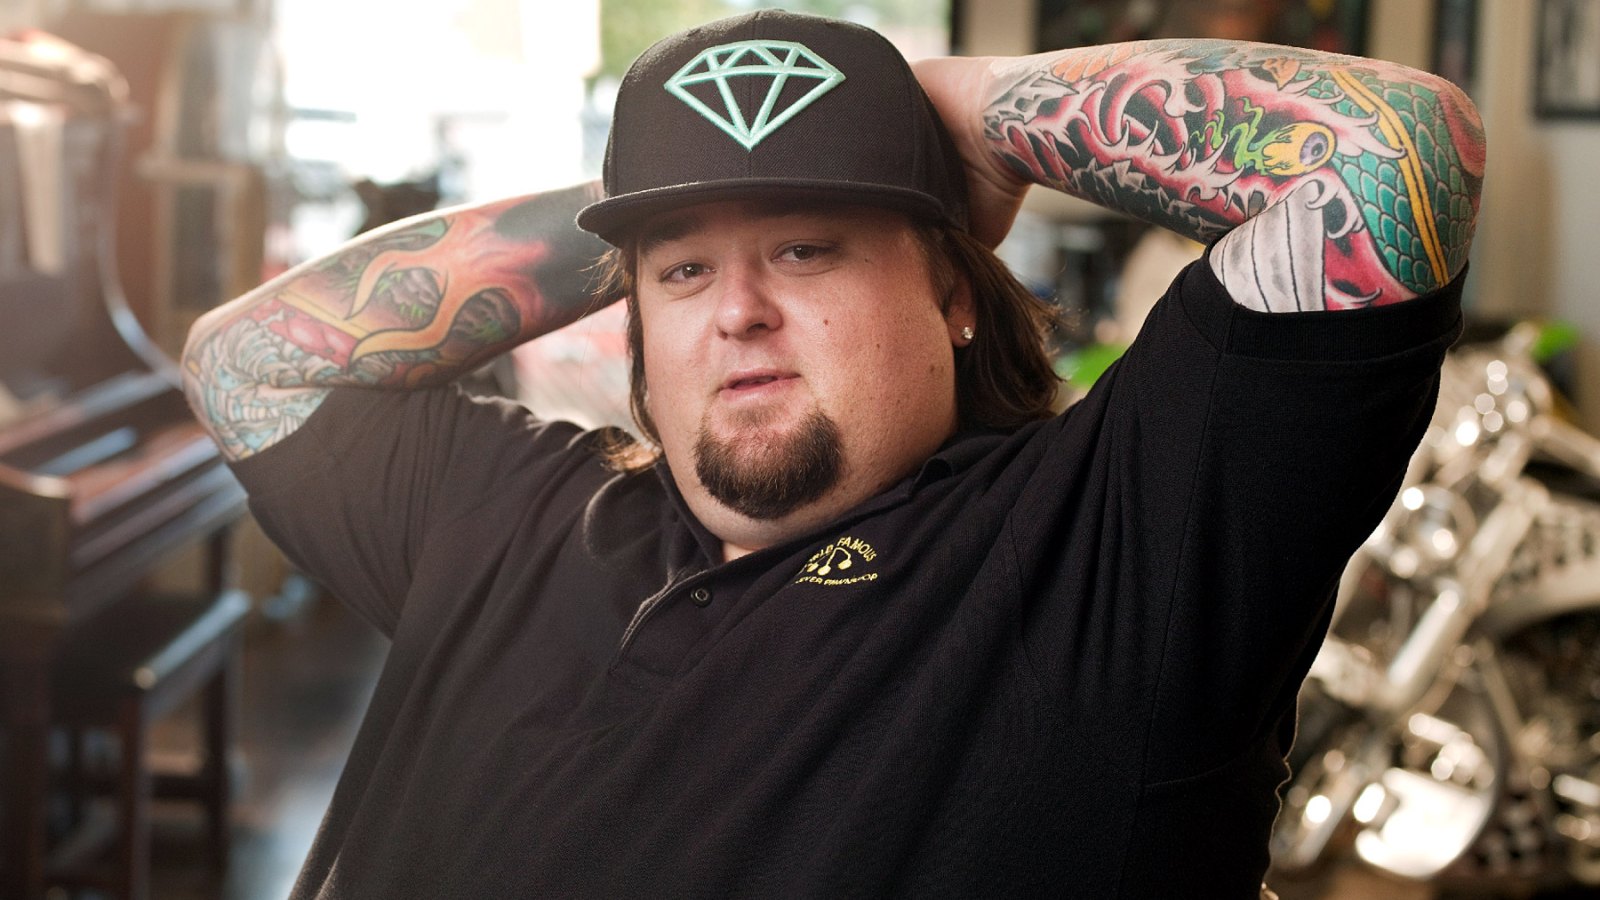 Chumlee from Pawn Stars